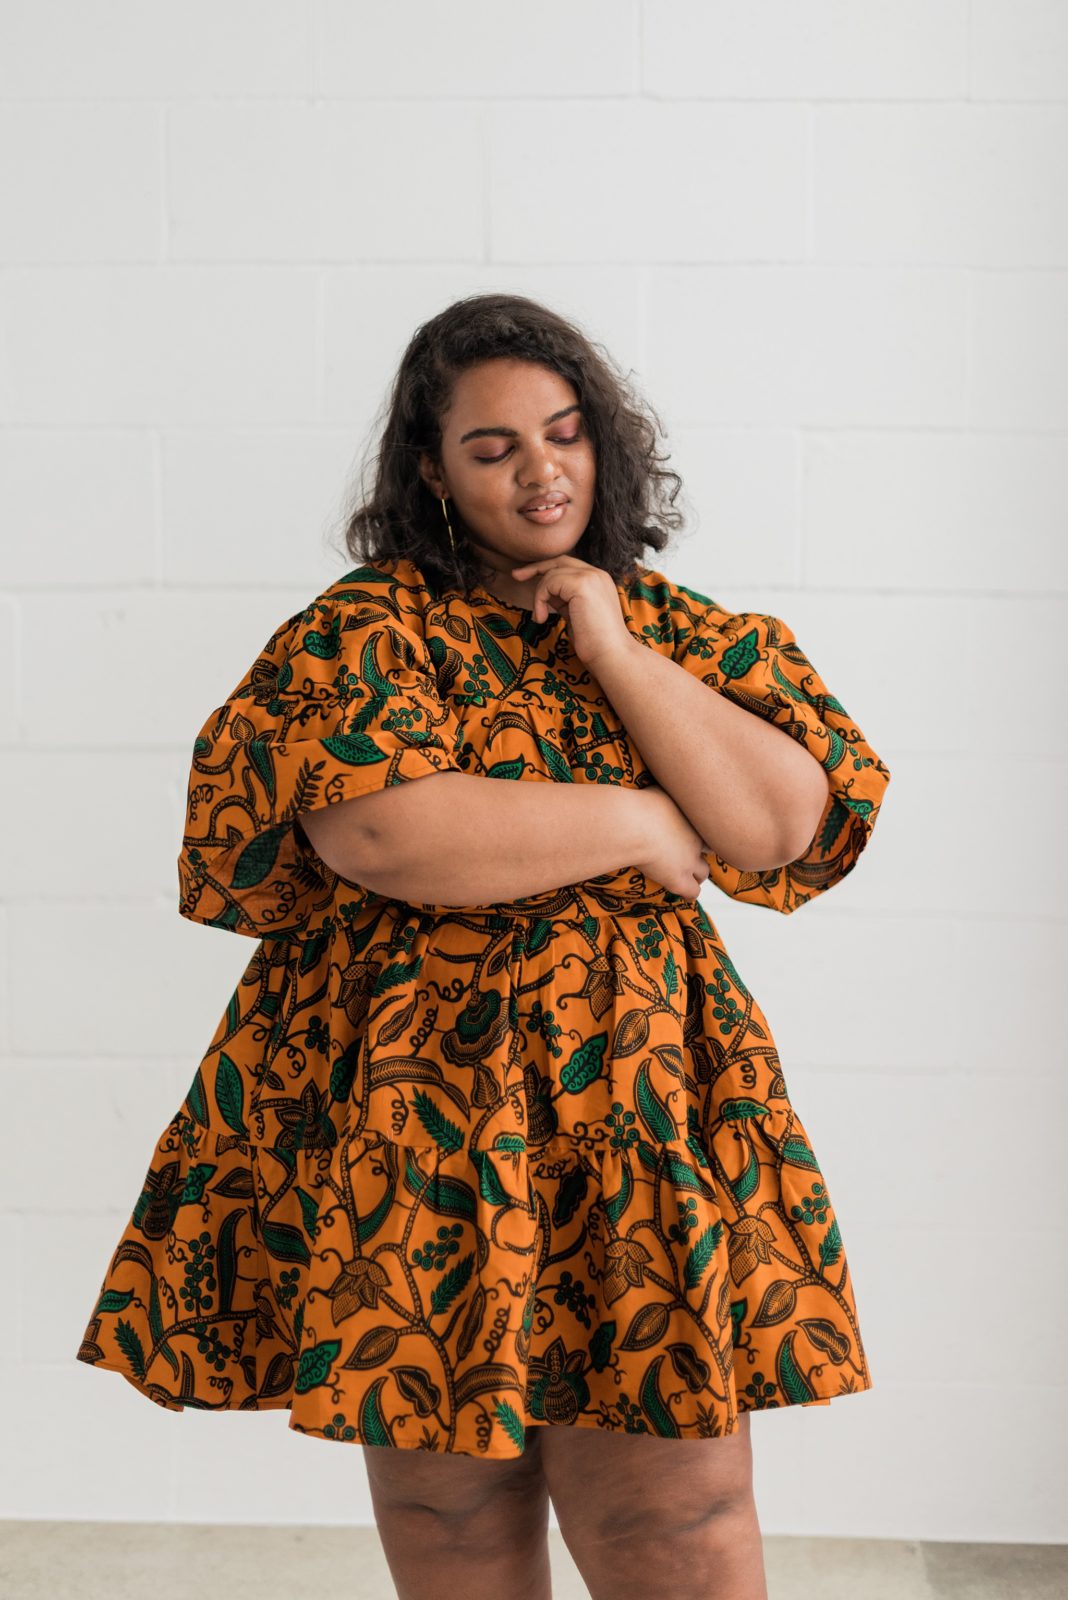 A black woman wearing a flared orange, patterned dress. She's leaning her chin on her arm.